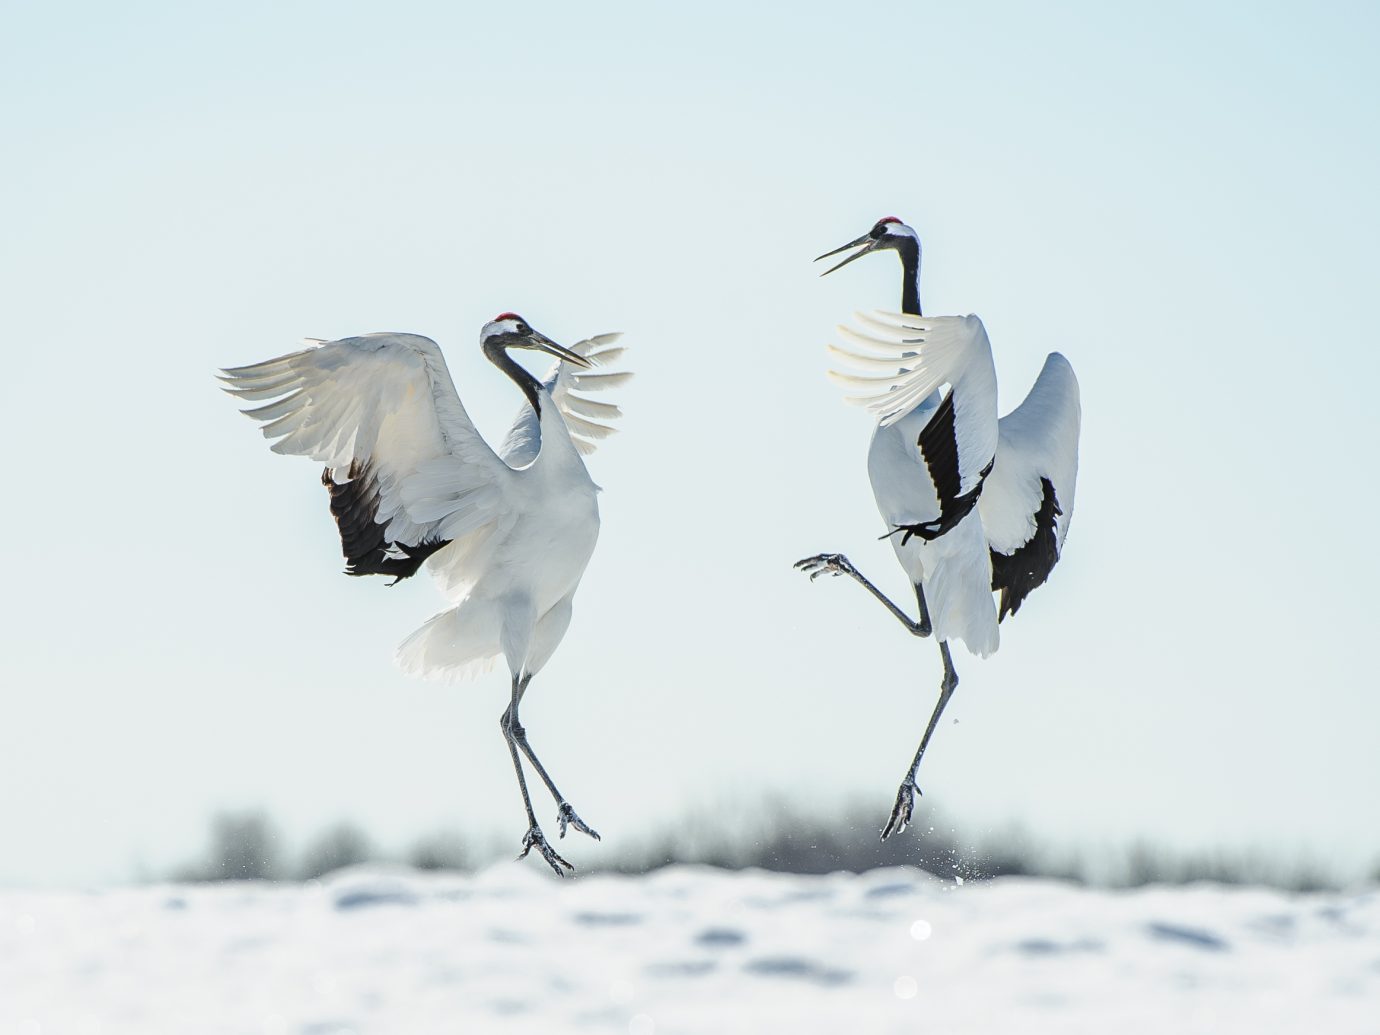 Two Japanese red crown cranes leaping and dancing performing their mating courtship ritual in the snow in Winter